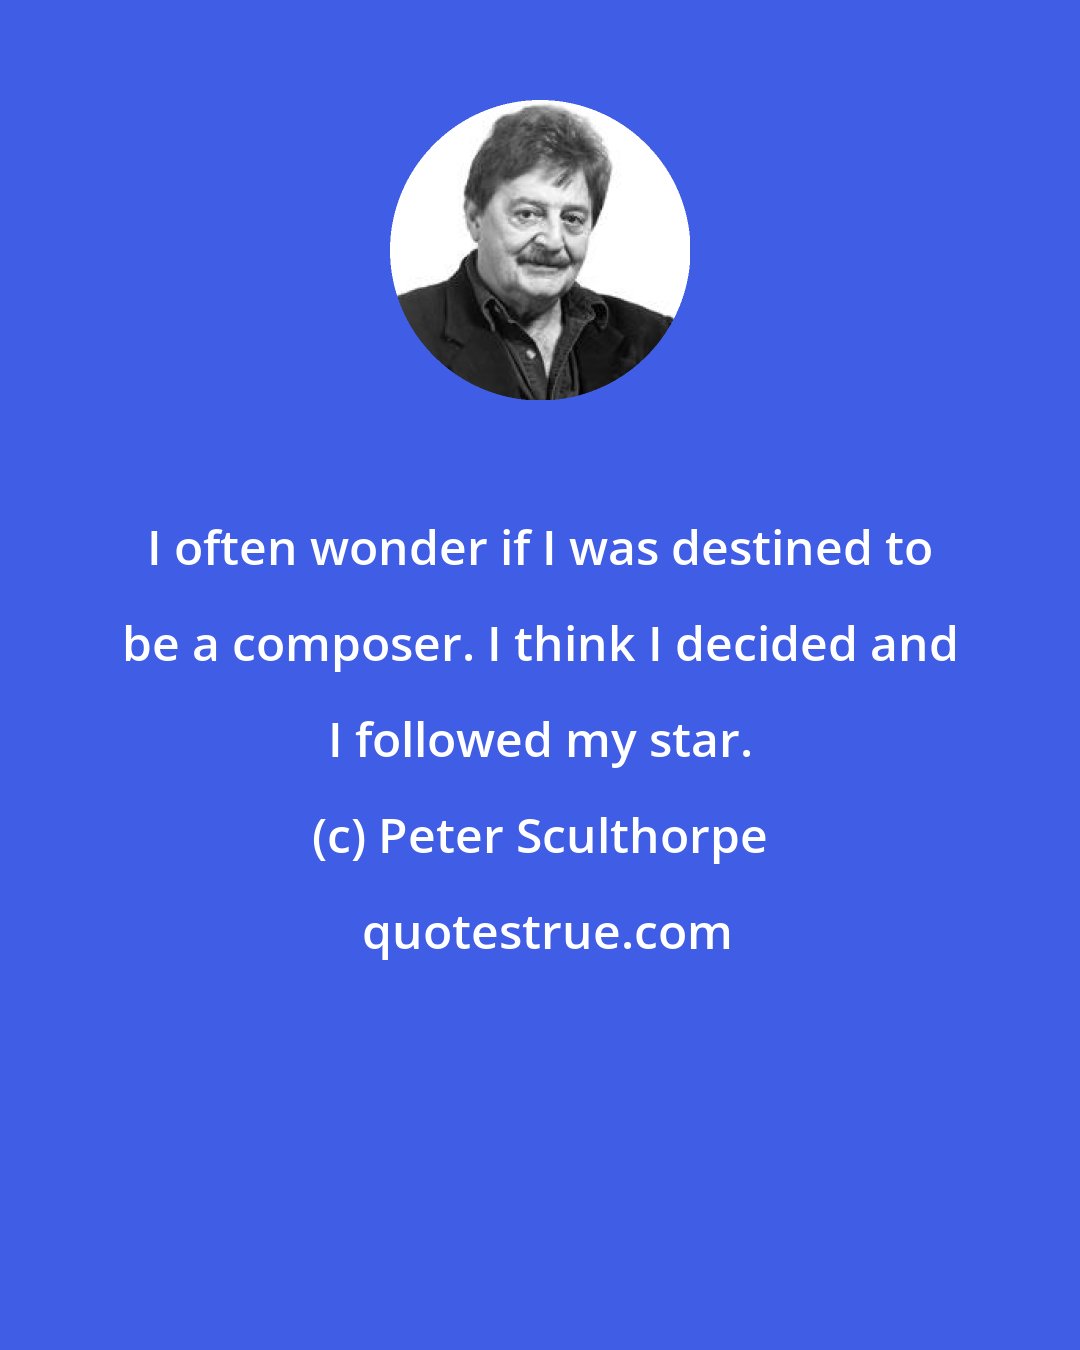 Peter Sculthorpe: I often wonder if I was destined to be a composer. I think I decided and I followed my star.